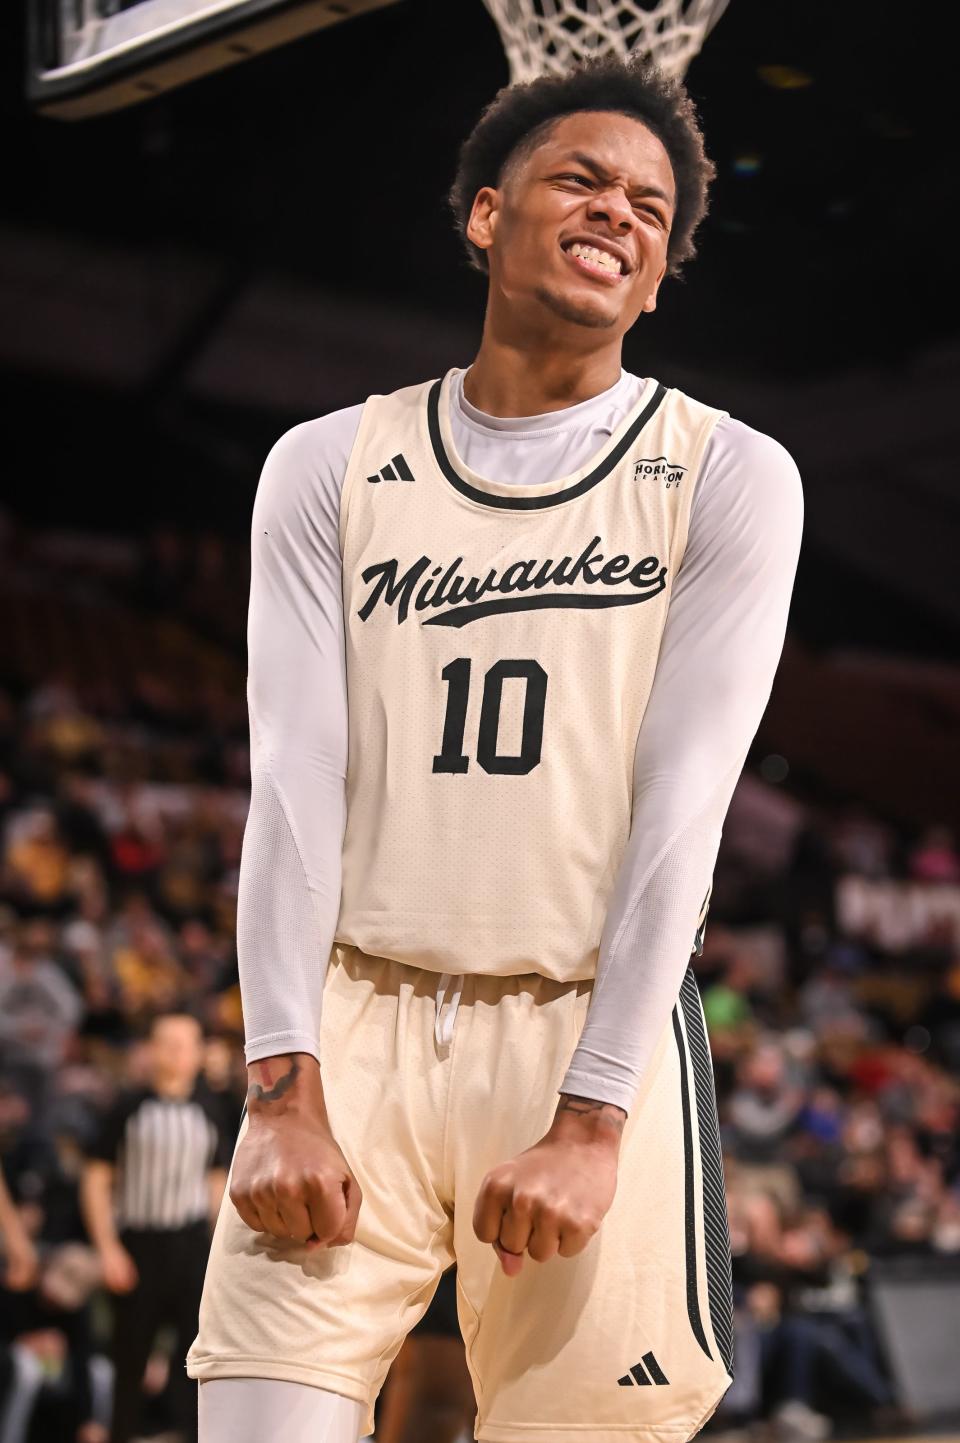 BJ Freeman is entering the NBA draft and the transfer portal, ending a spectacular two-year run at UW-Milwaukee.